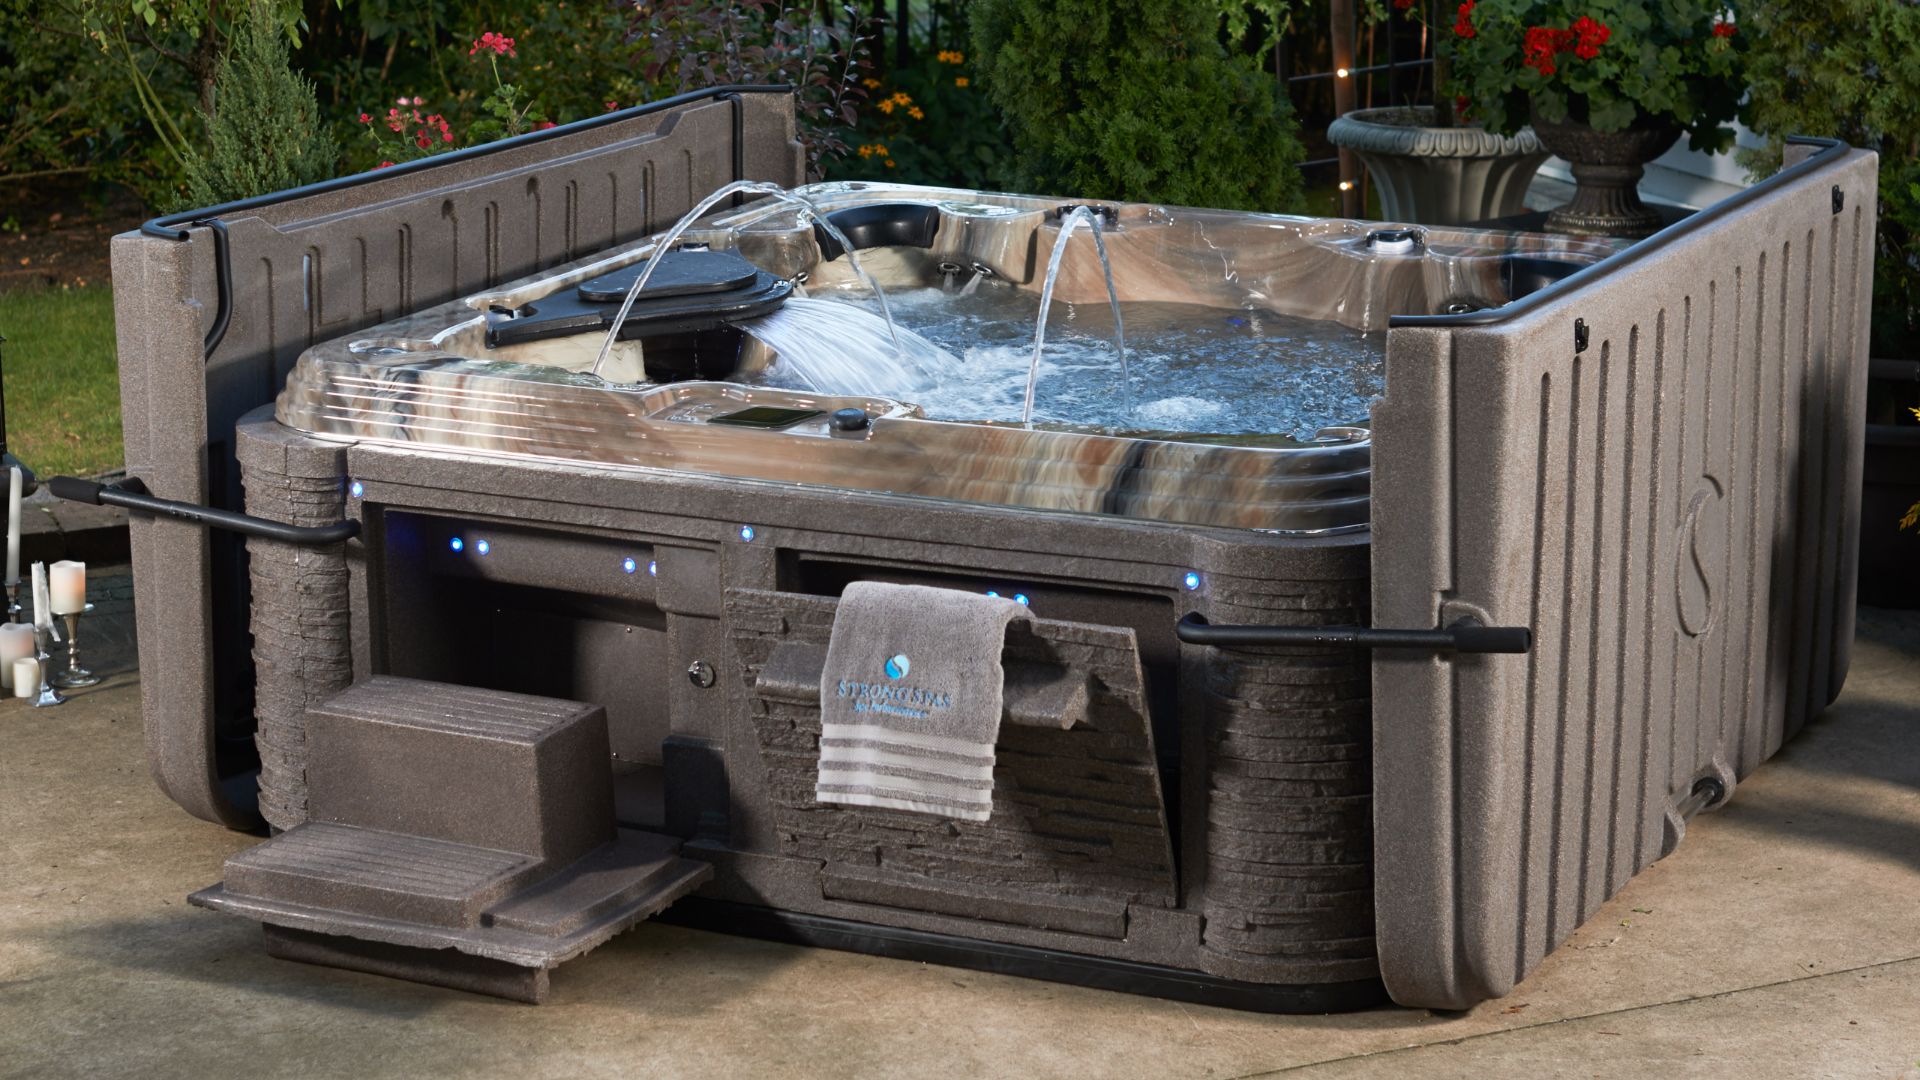 What Makes Strong Spas an Innovative Hot Tub?